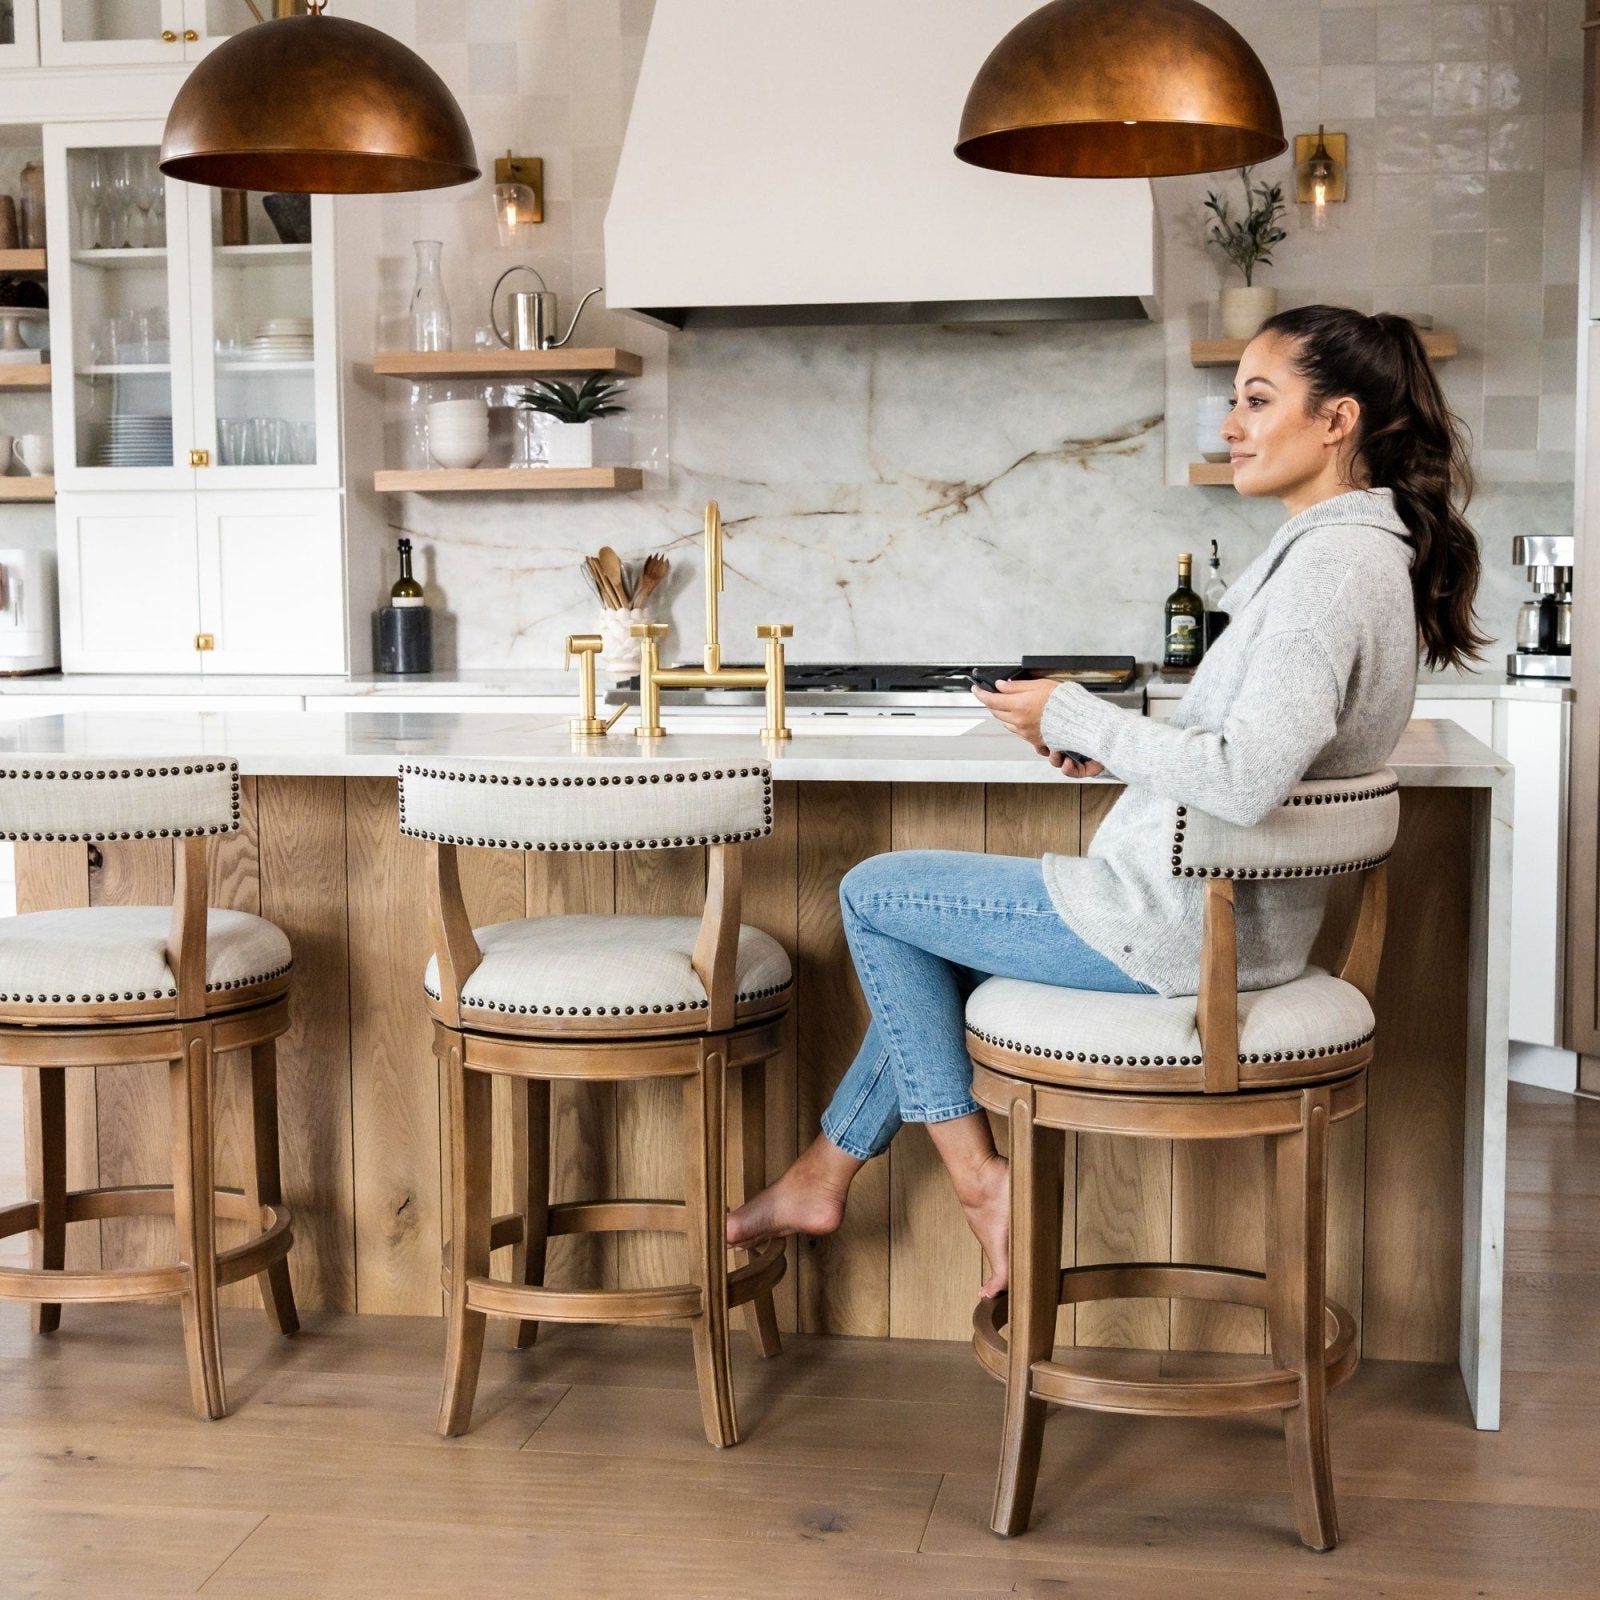 Alexander Counter Stool in Weathered Oak Finish with Sand Color Fabric Upholstery in Stools by Maven Lane